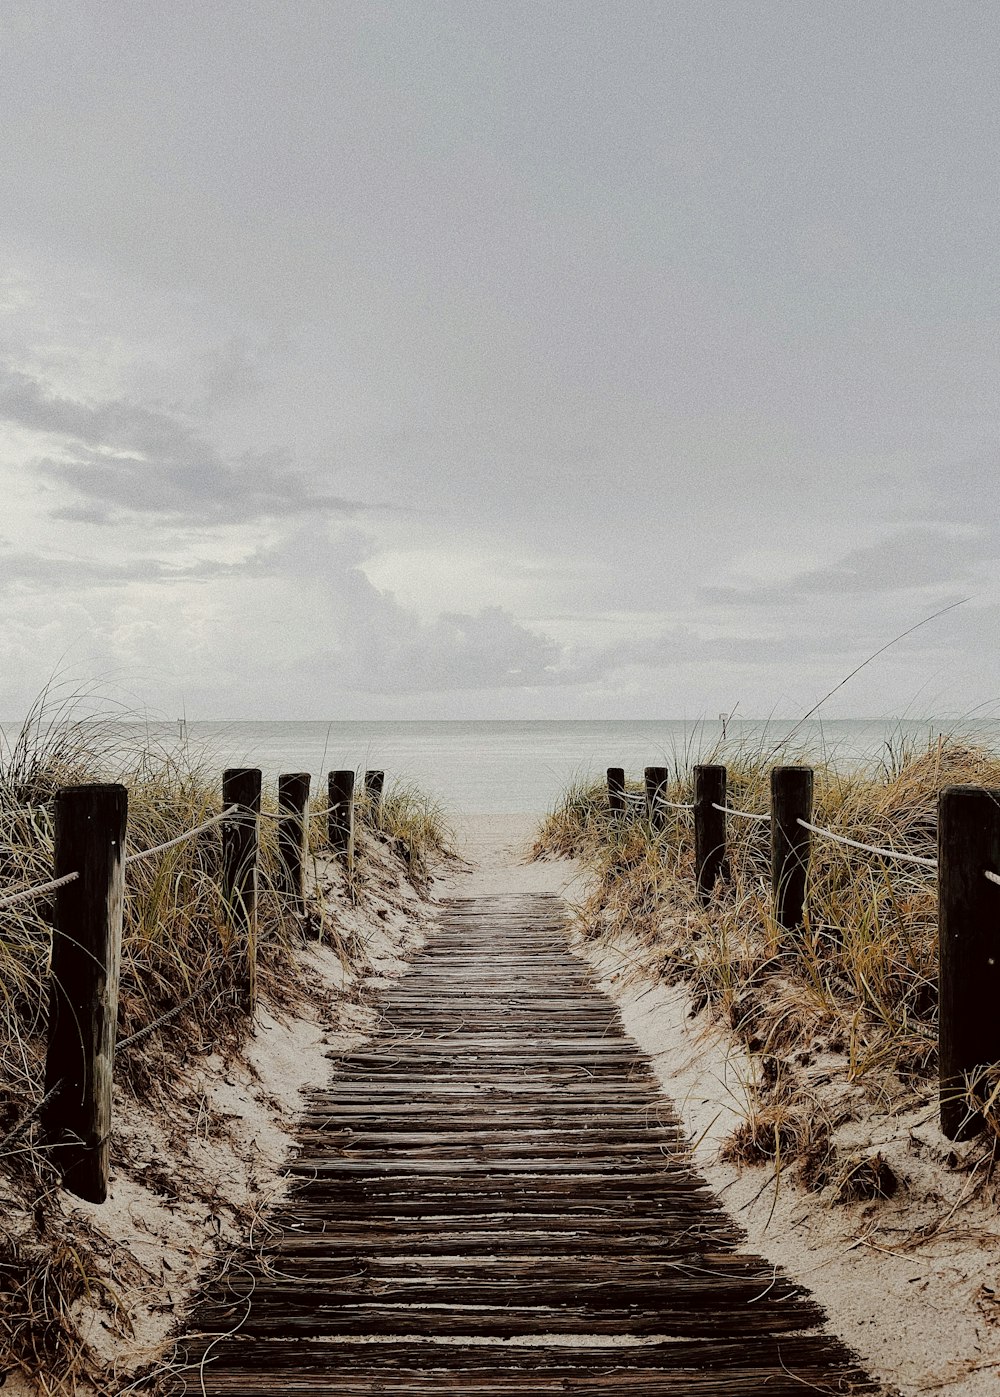 a wooden path leading to the beach on a cloudy day